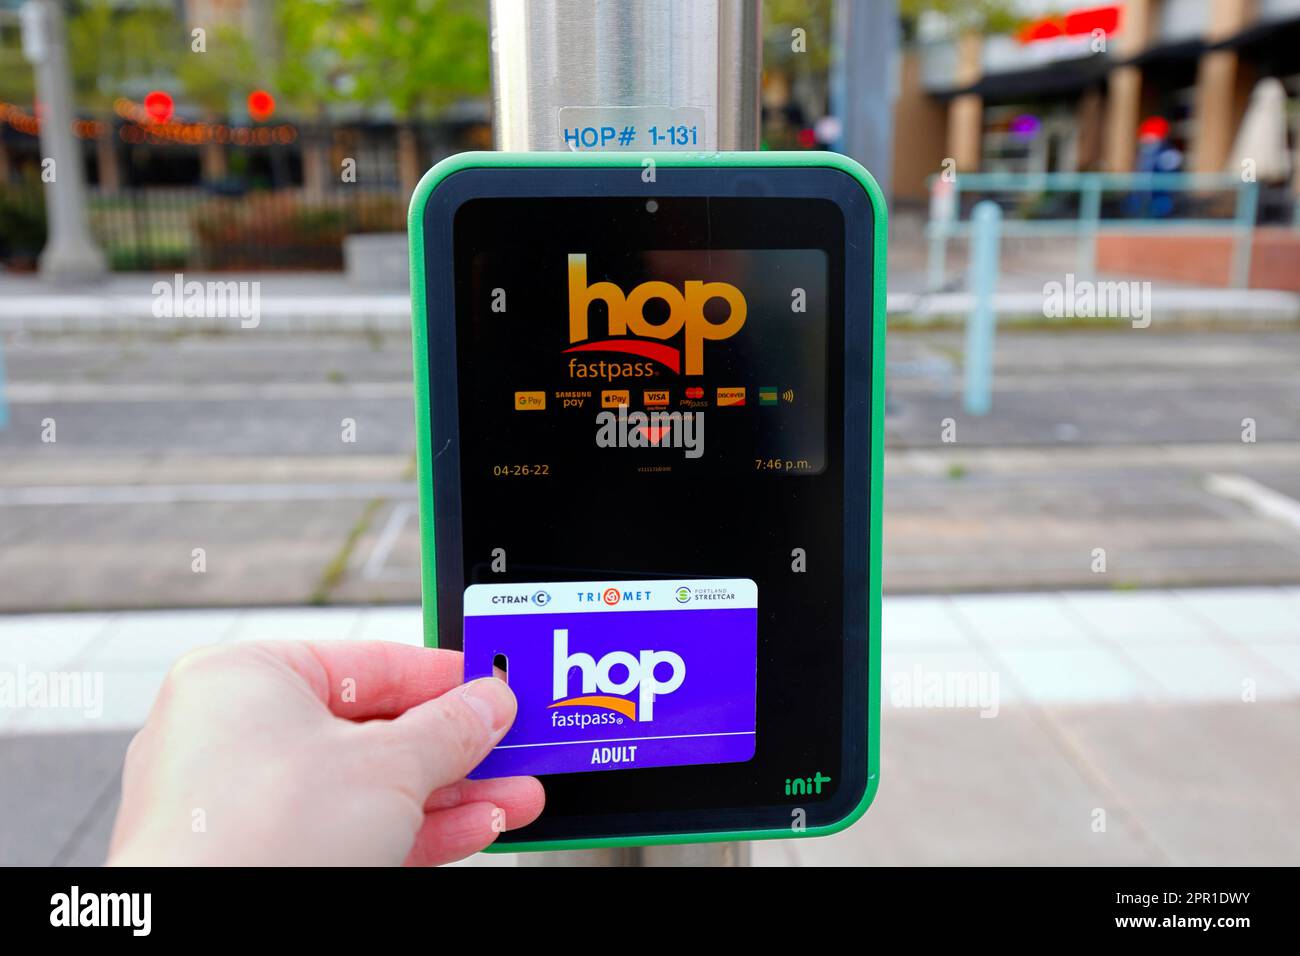 A person taps a HOP Fastpass transit card to a contactless payment device at a Trimet lightrail station in Beaverton, Oregon near Portland. Stock Photo